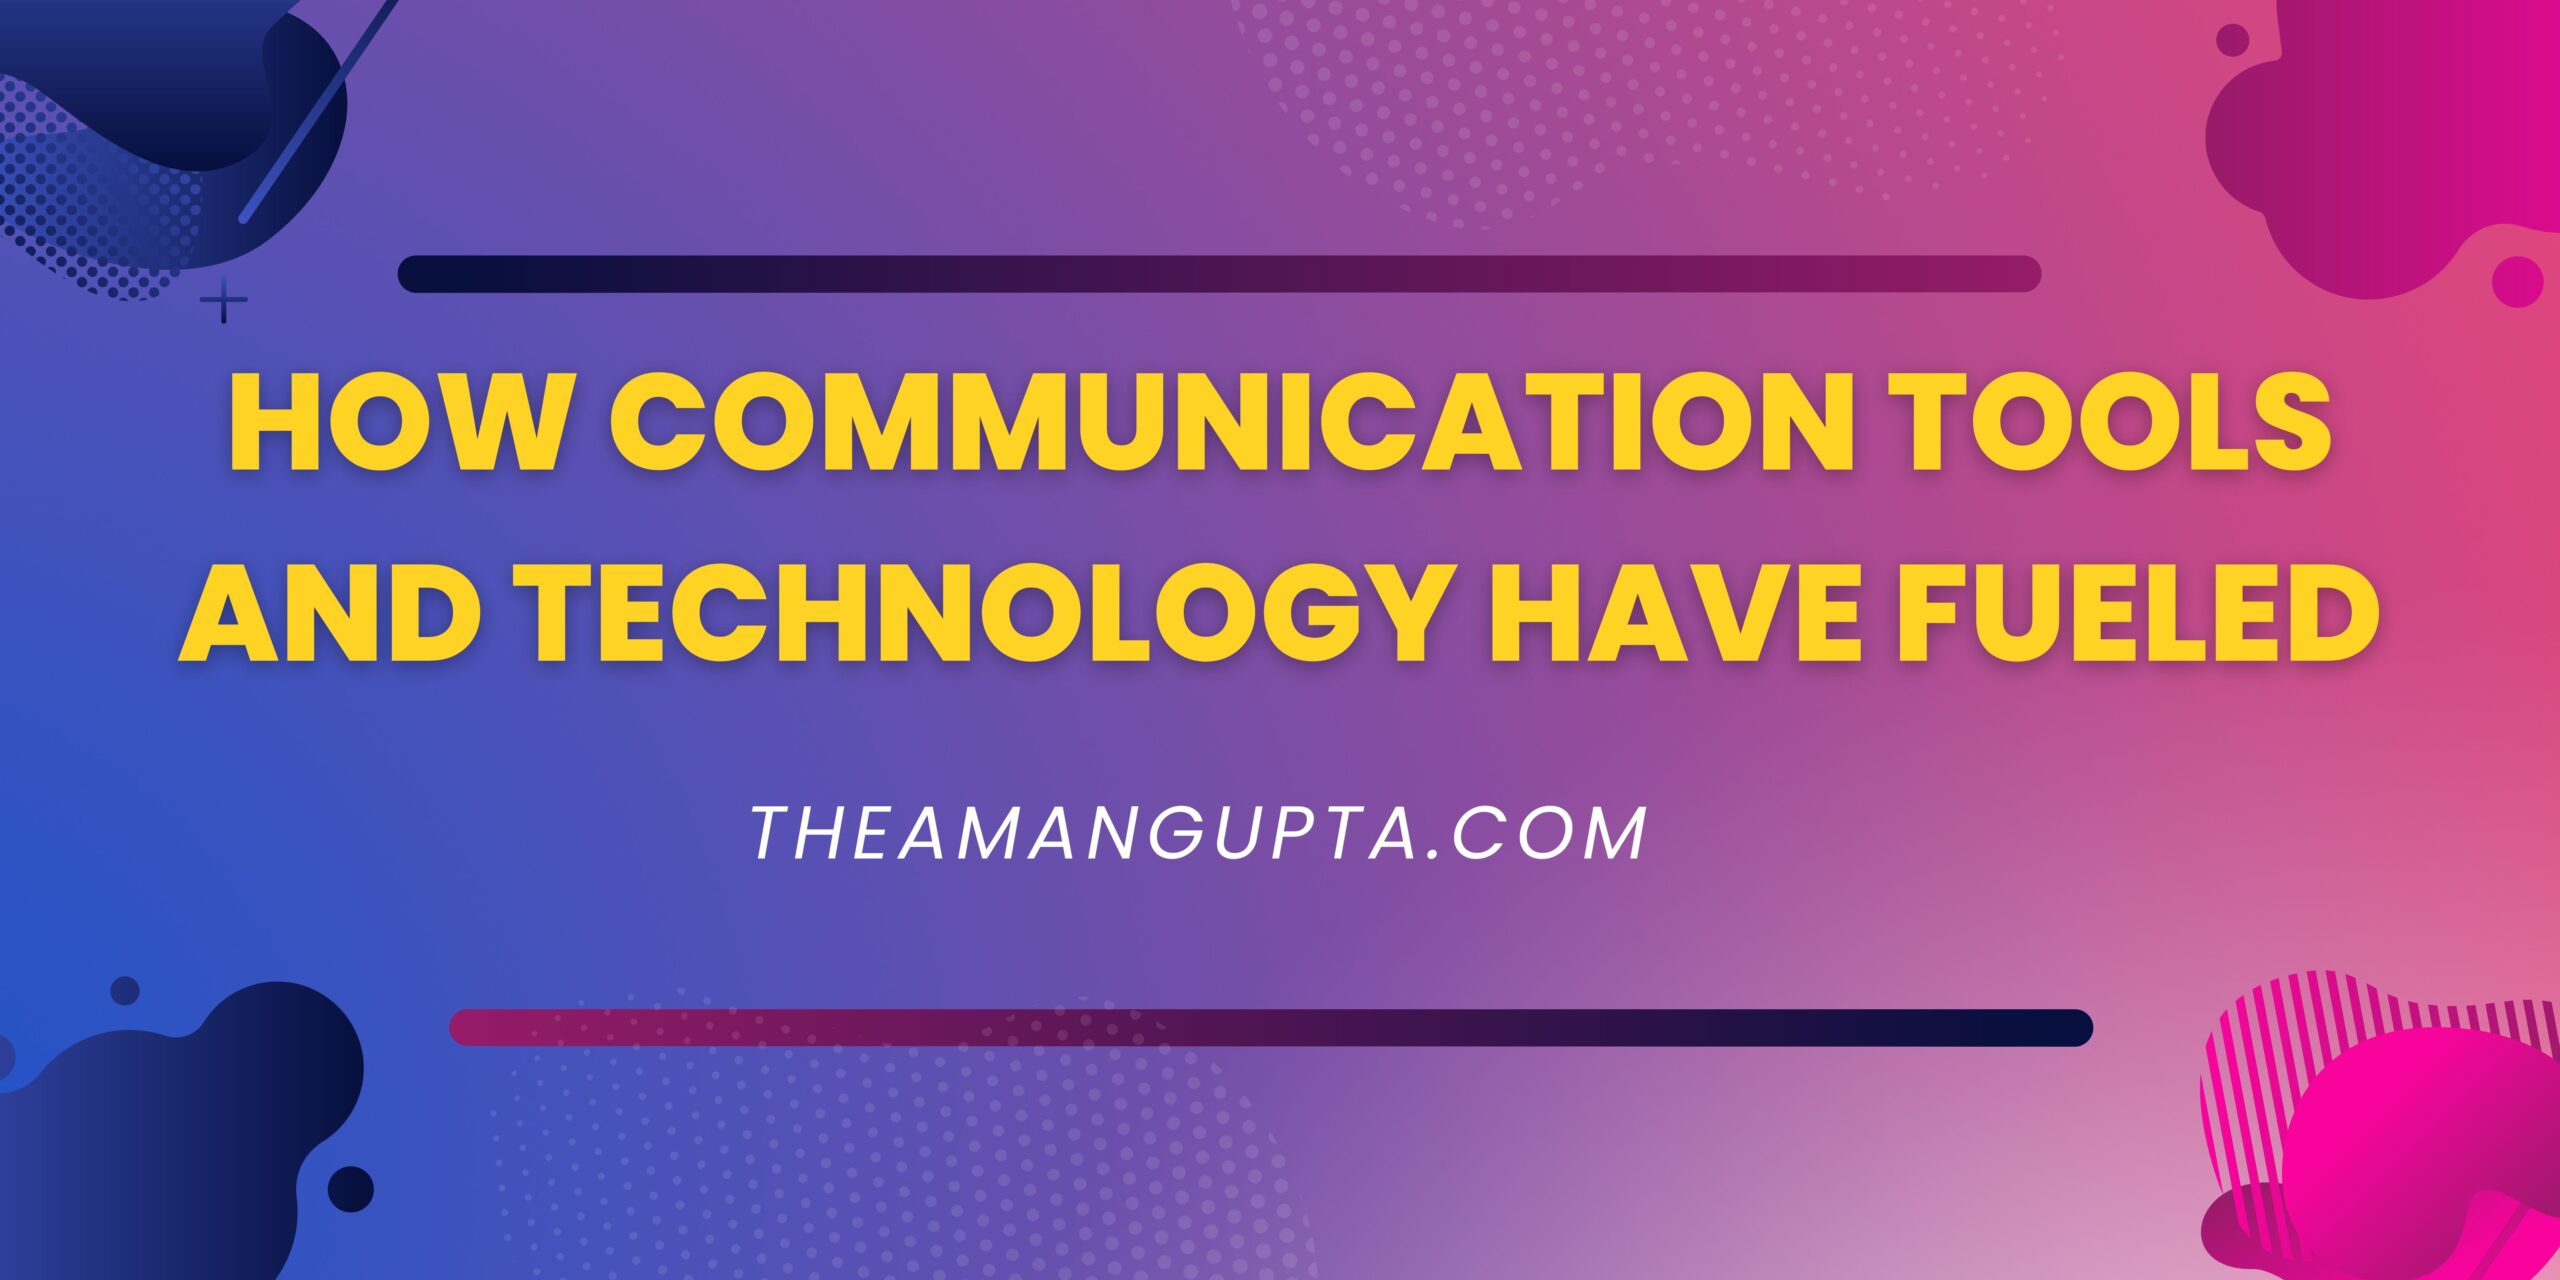 How Communication Tools And Technology Have Fueled|Technology|Theamangupta|Theamangupta